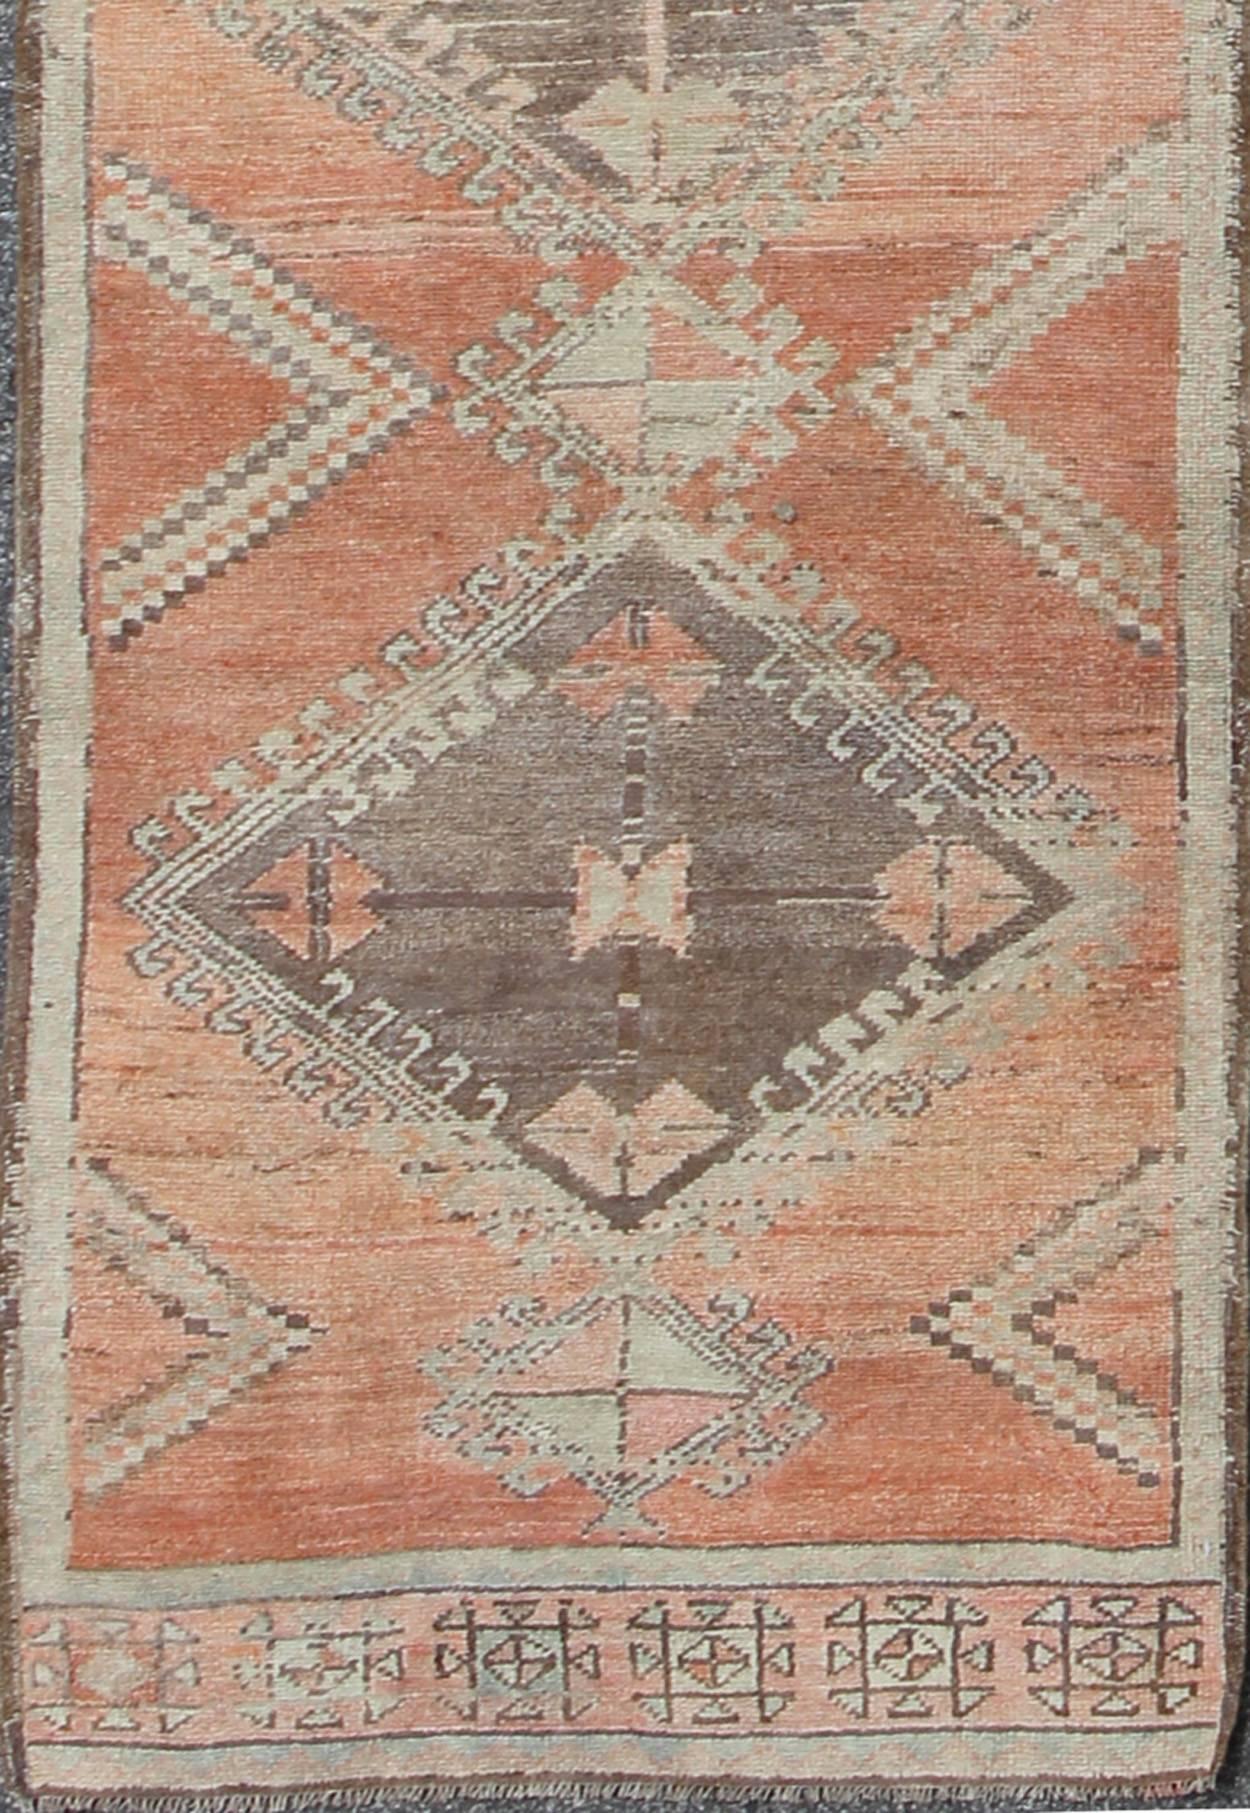  Runner with Multi-Medallions and Tribal Motifs in Brown and Red

This Turkish Oushak runner features a multi-medallion design as well as patterns of smaller tribal motifs. Colors include dark brown, muted red, and cream. Turkish Oushaks are notable